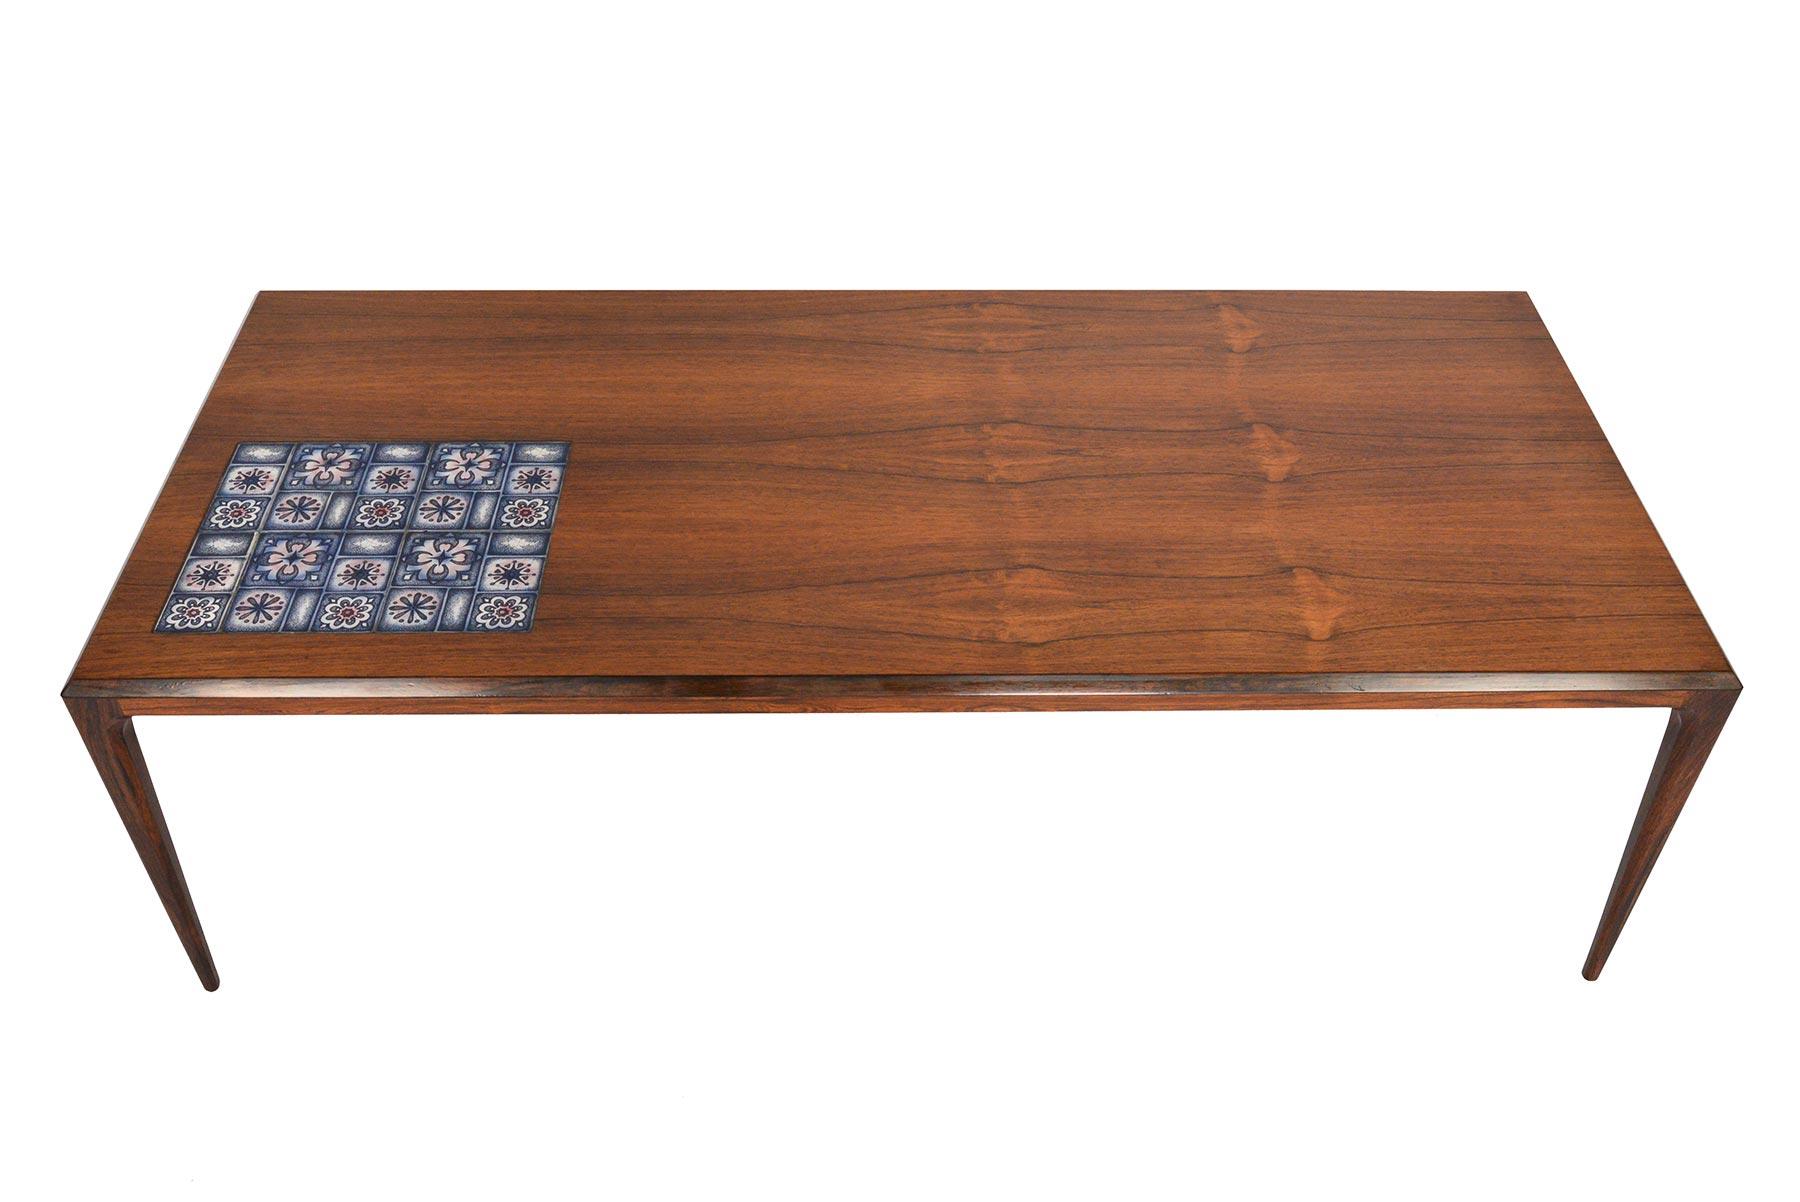 20th Century Johannes Andersen Rosewood Coffee Table with Tile